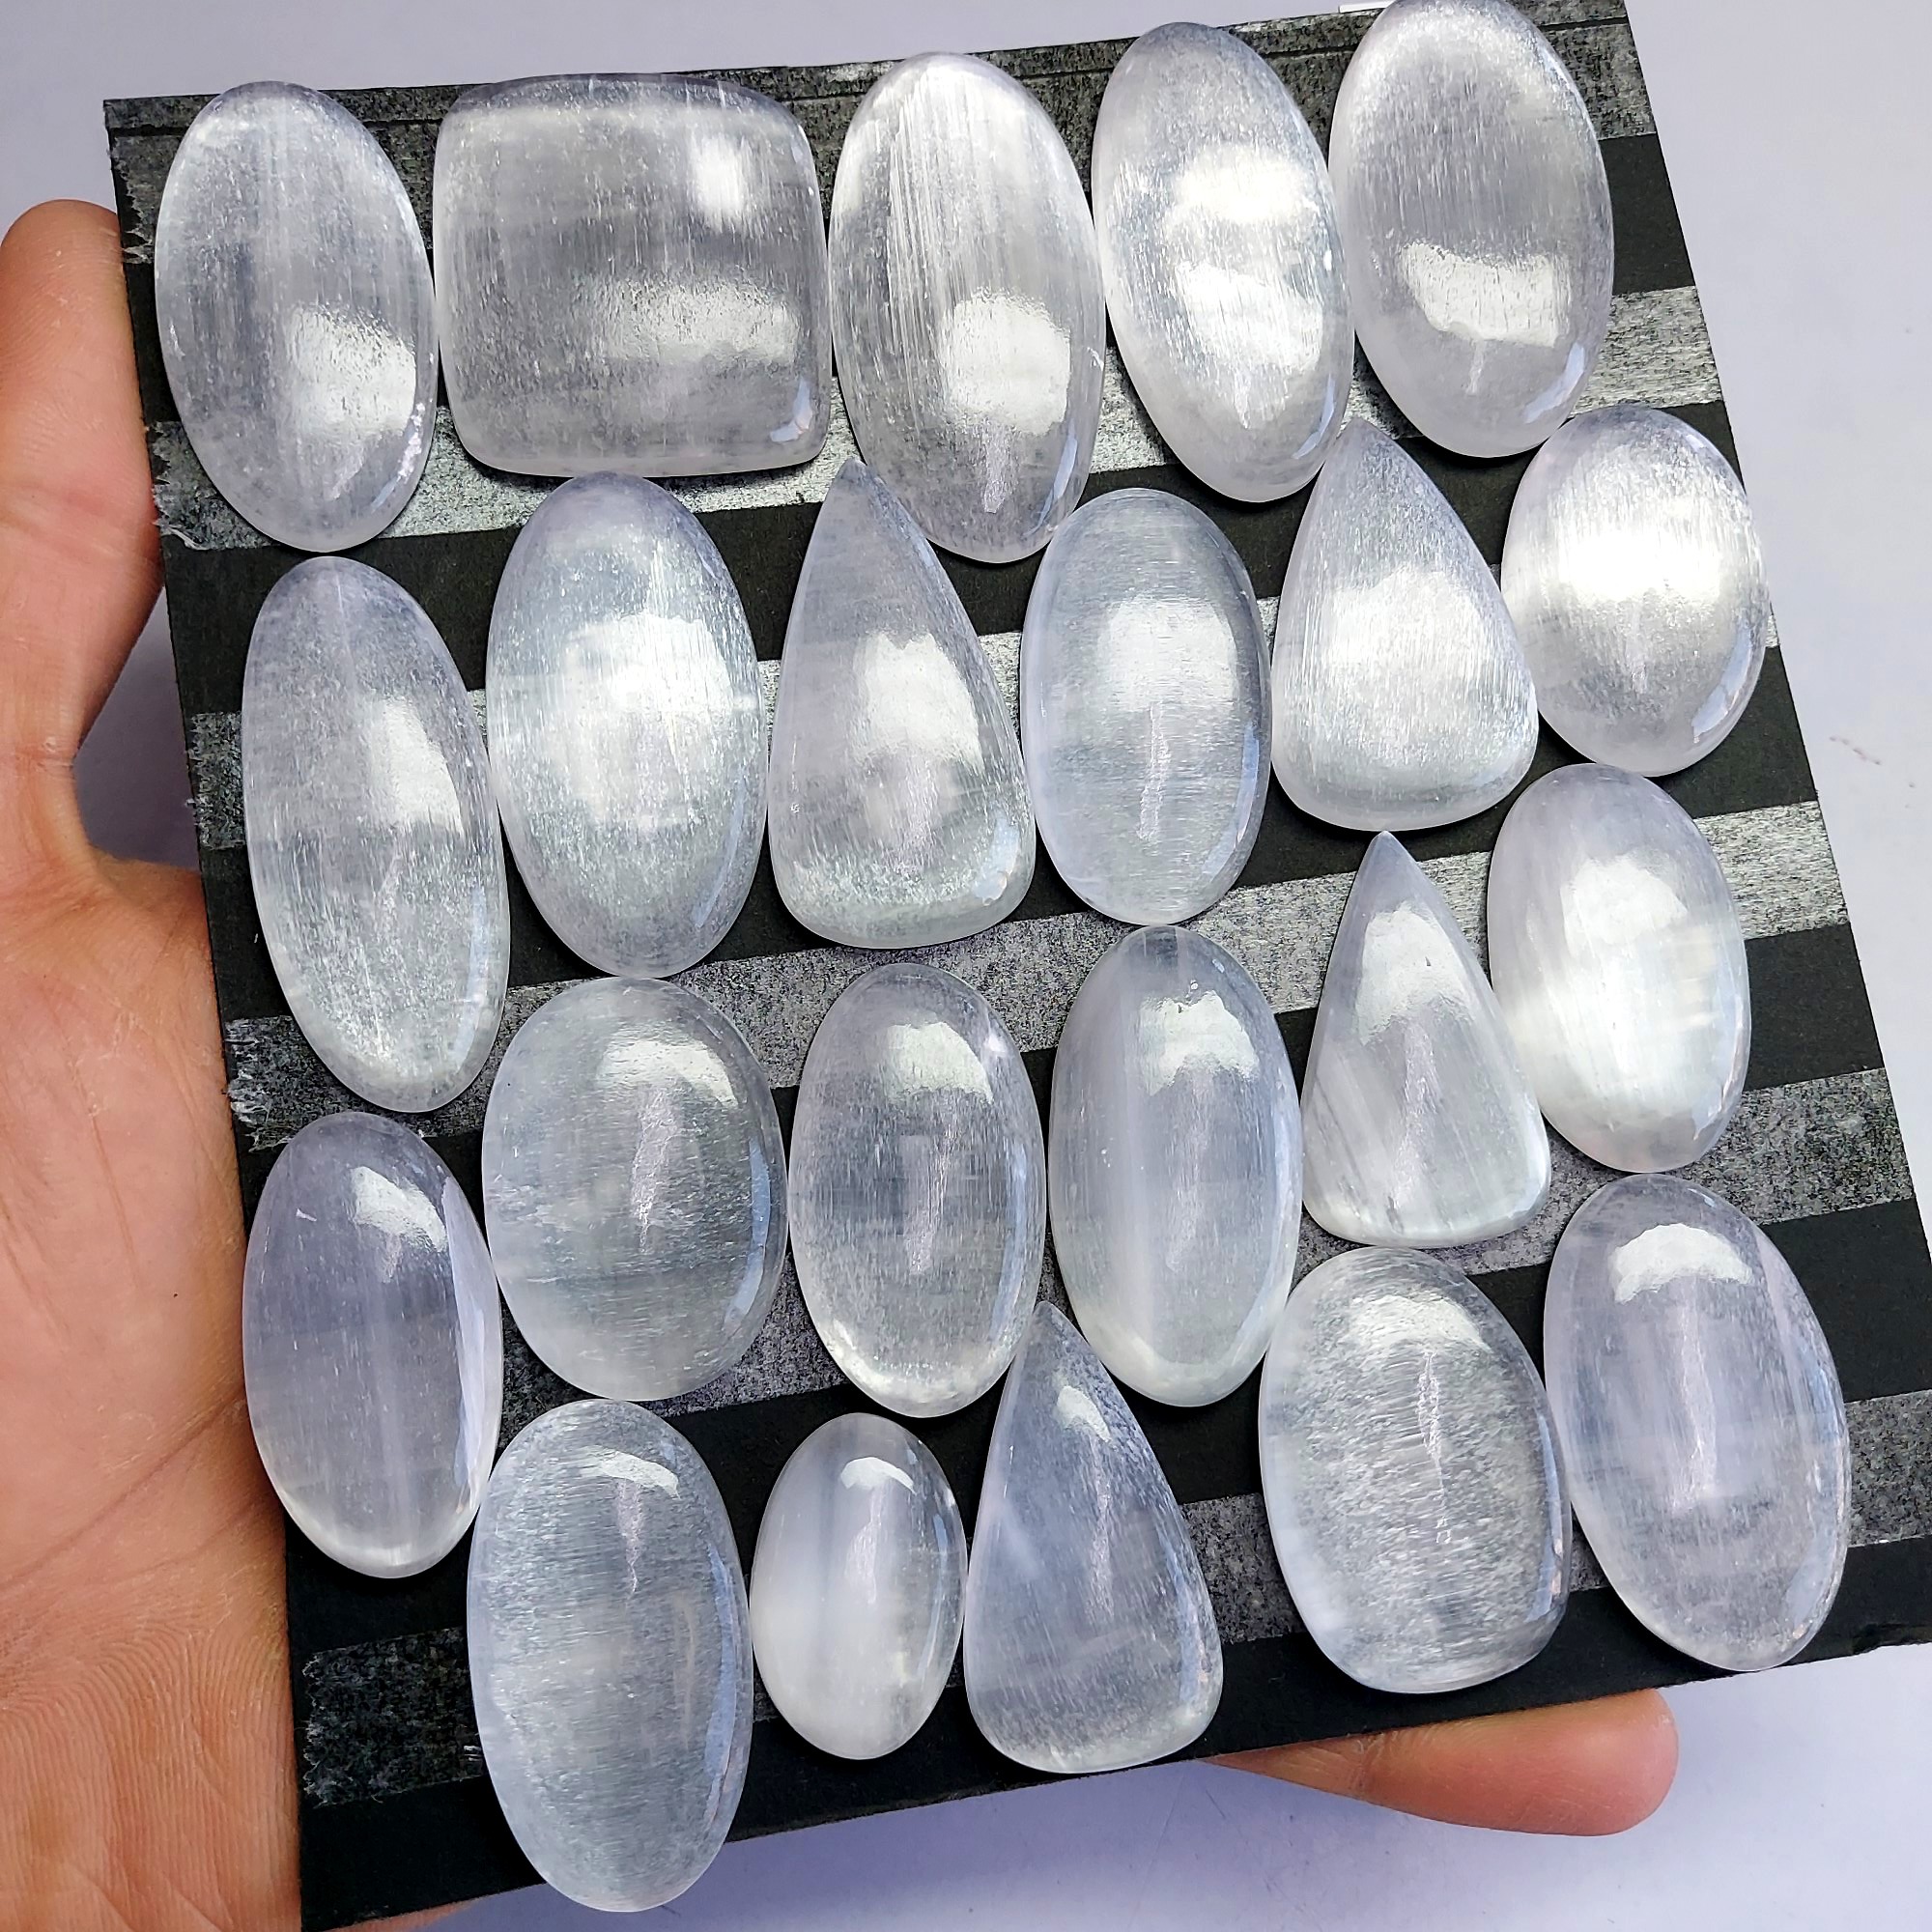 22pcs 1250 Cts Natural White Selenite Loose Cabochon Lot  Gemstone For Jewelry Wholesale Lot Size 38x34 27x16mm